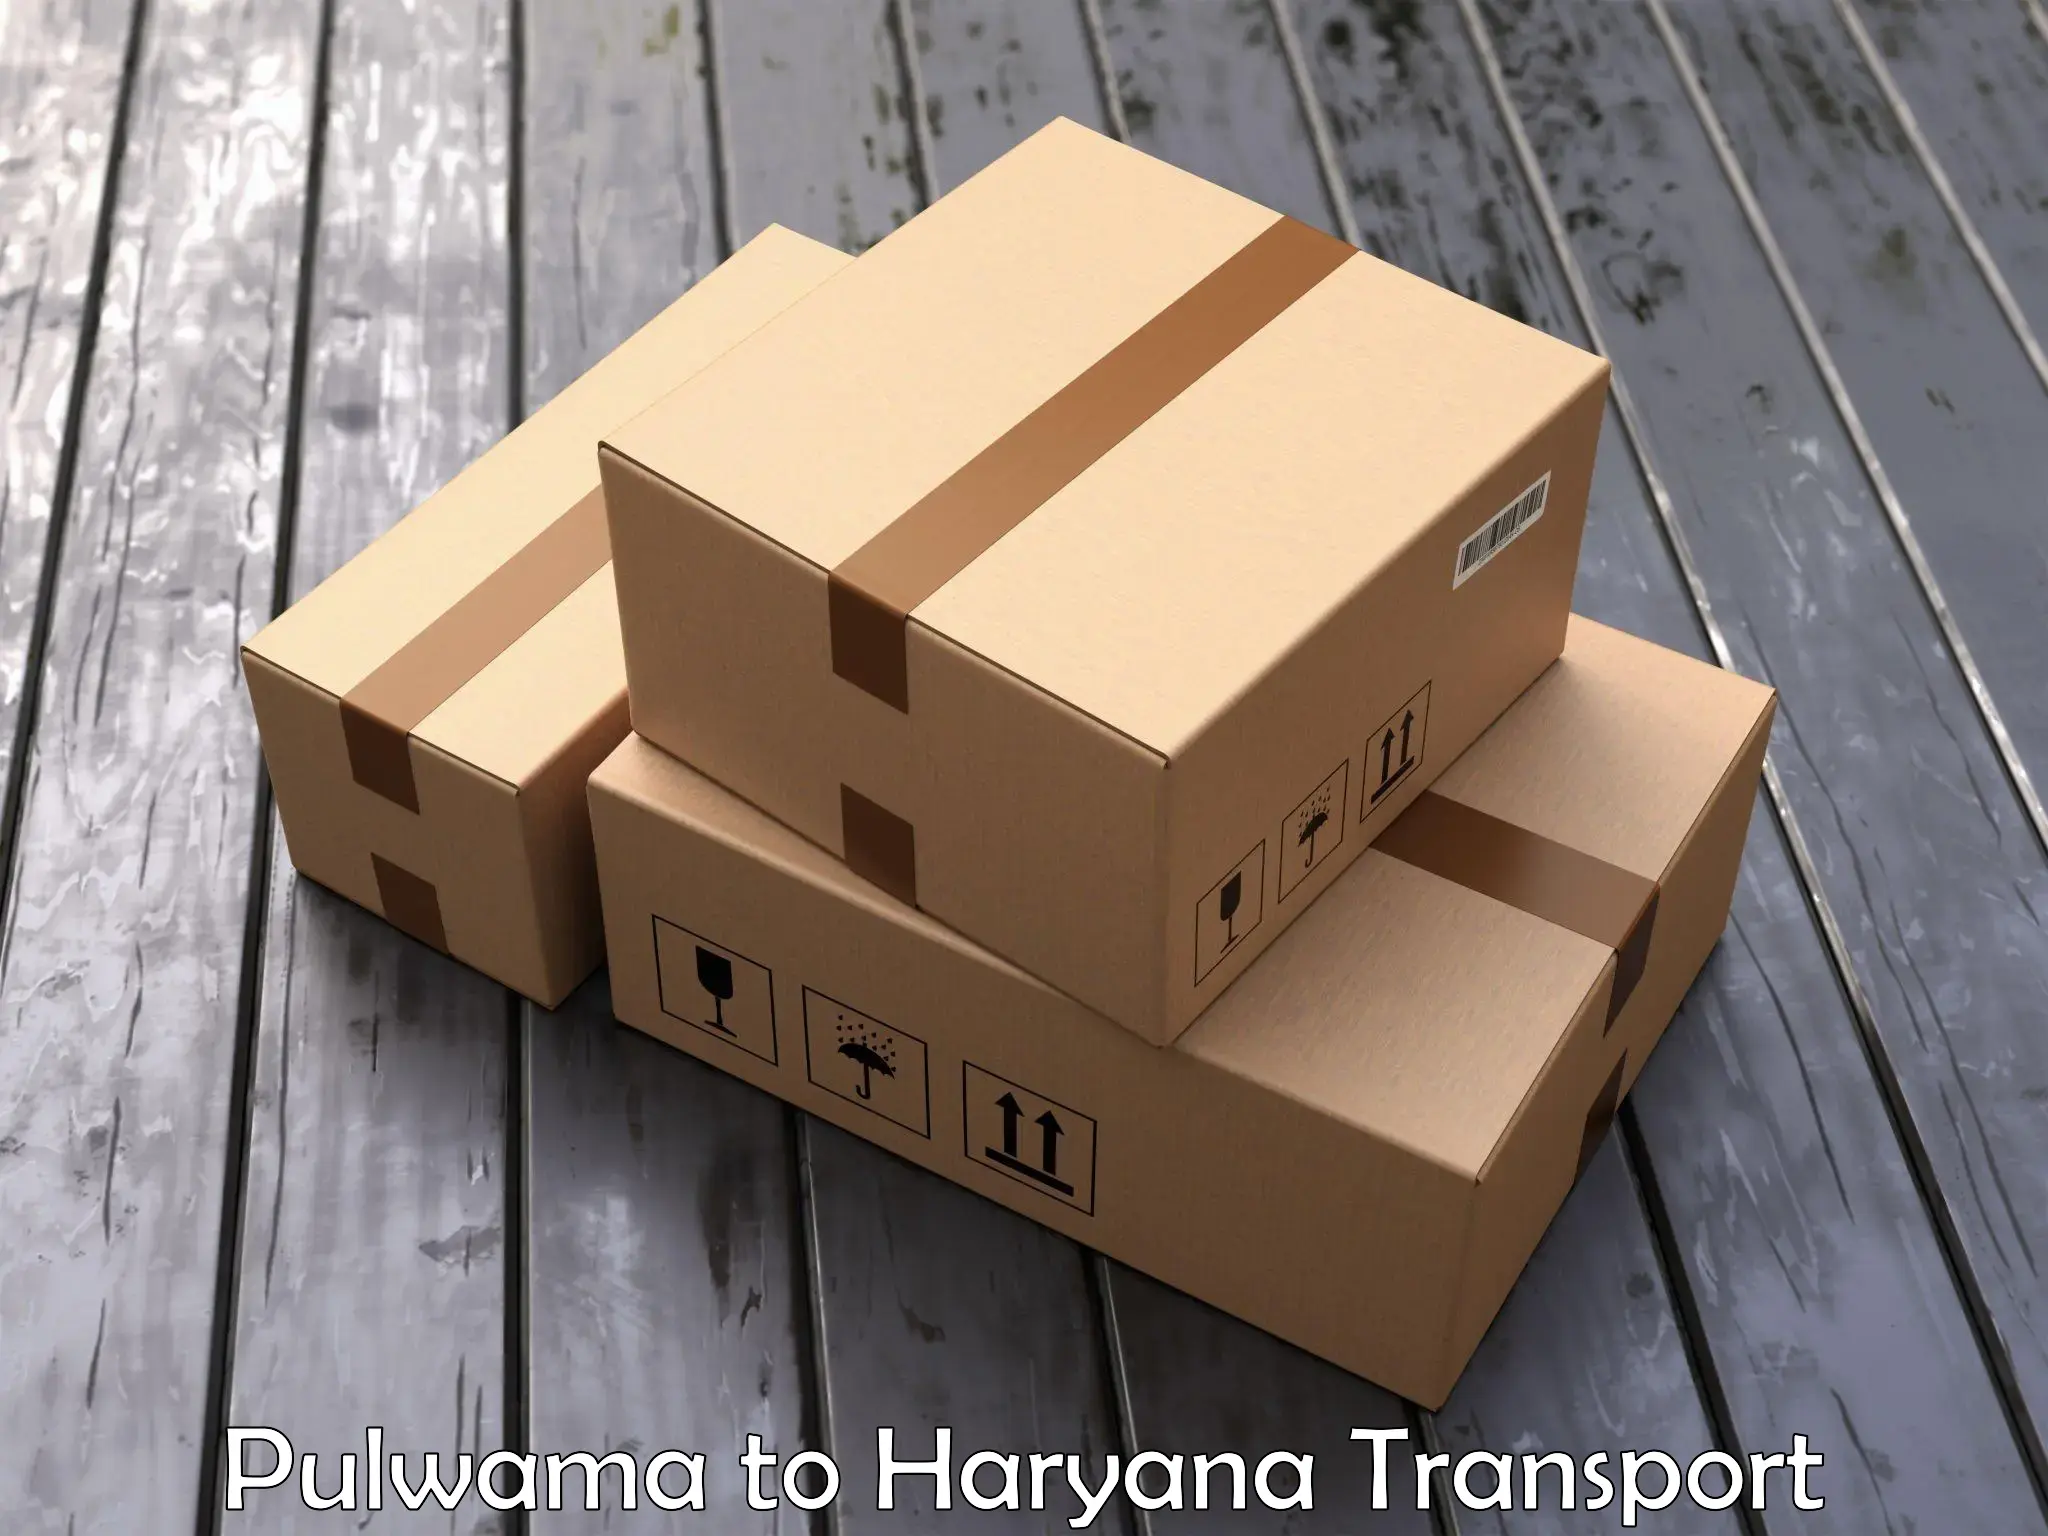 Two wheeler parcel service Pulwama to Pataudi